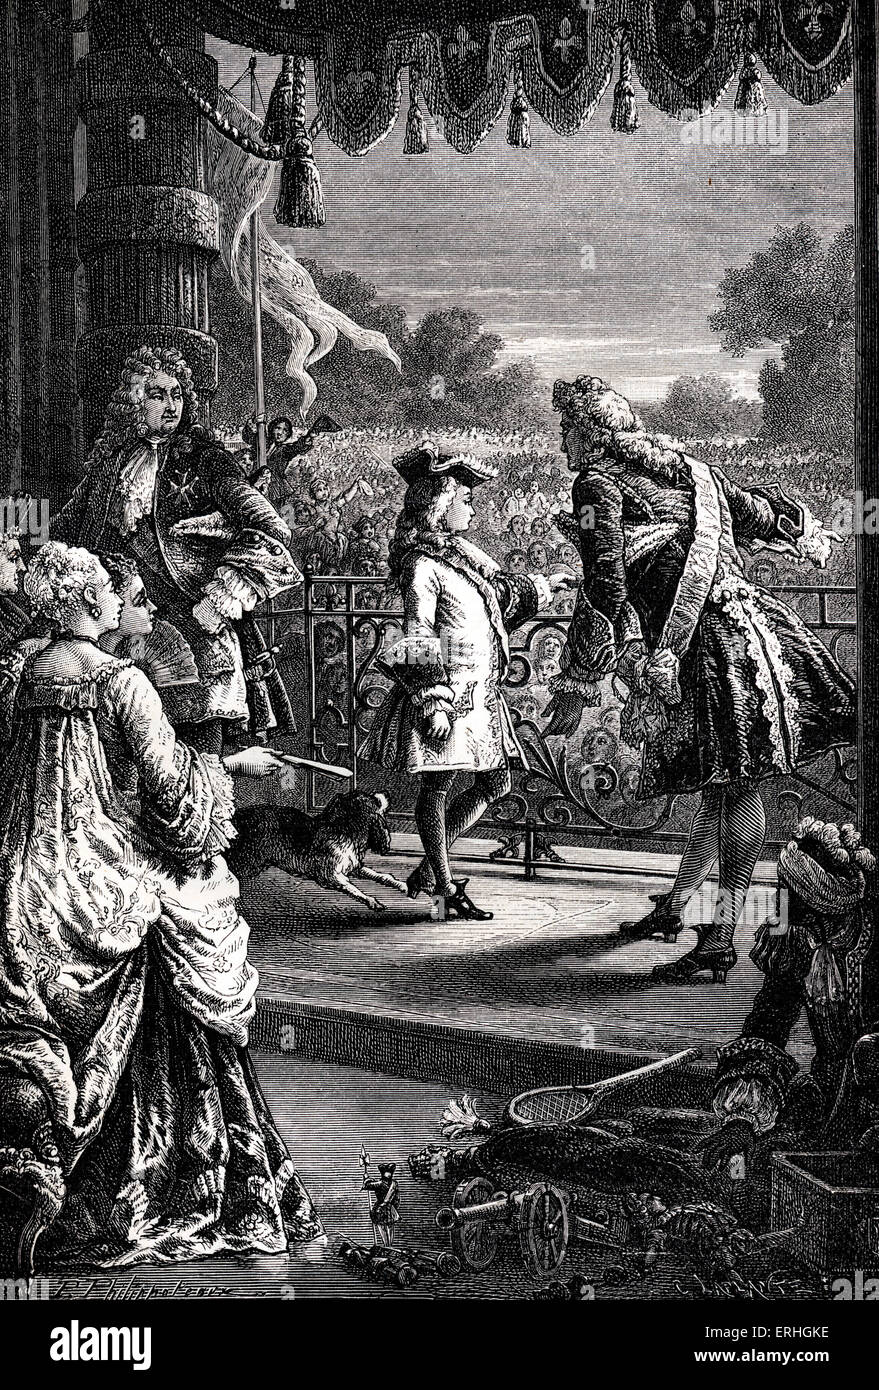 King Louis XV of France - illustration of the child king, on a balcony, being introduced to his people, 1715. 15 February 1710 - 10 May 1774. King from 1 September 1715 - 10 May 1774. Stock Photo